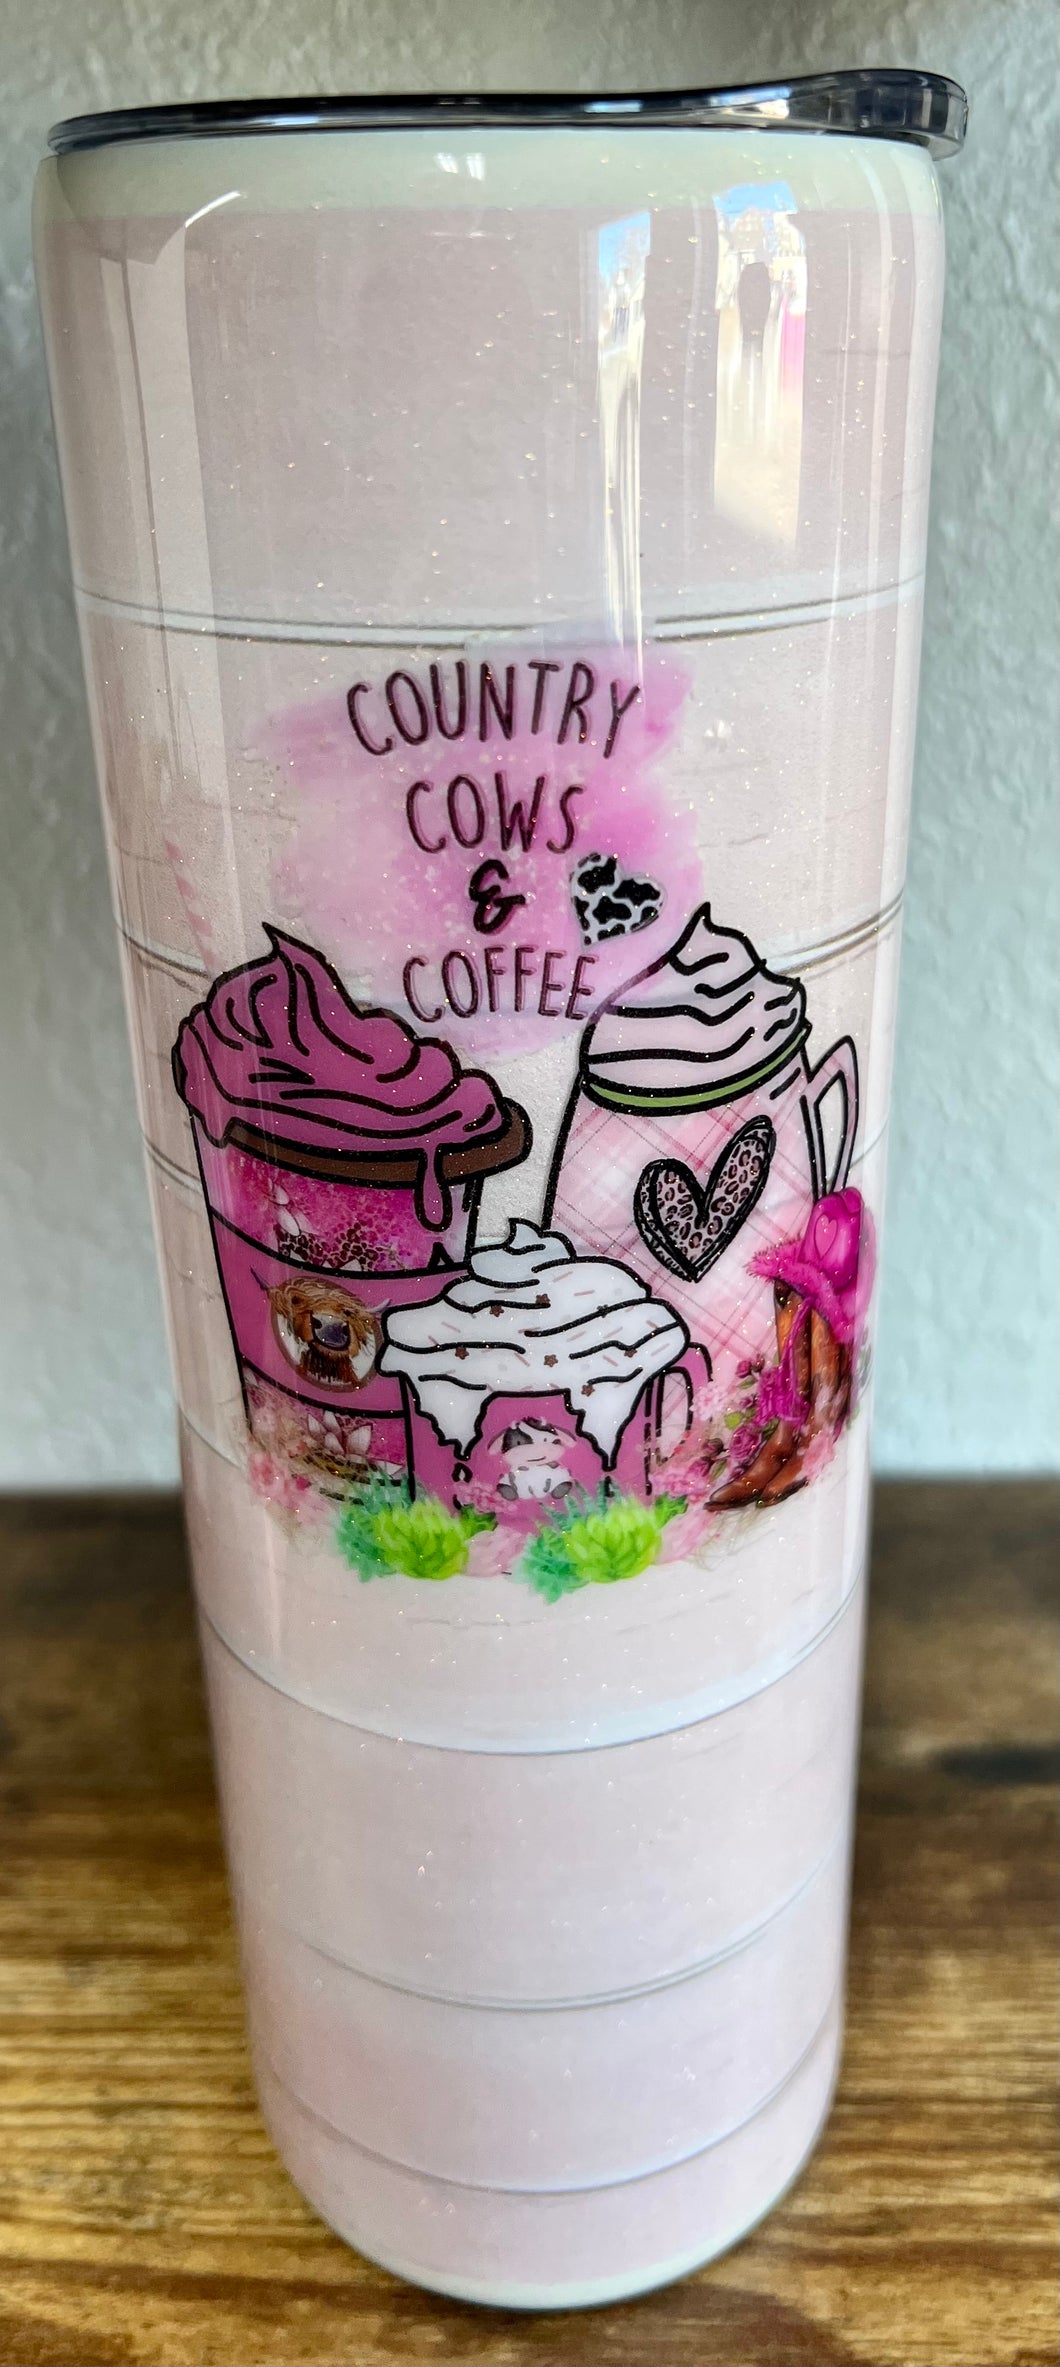 Country Cows & Coffee